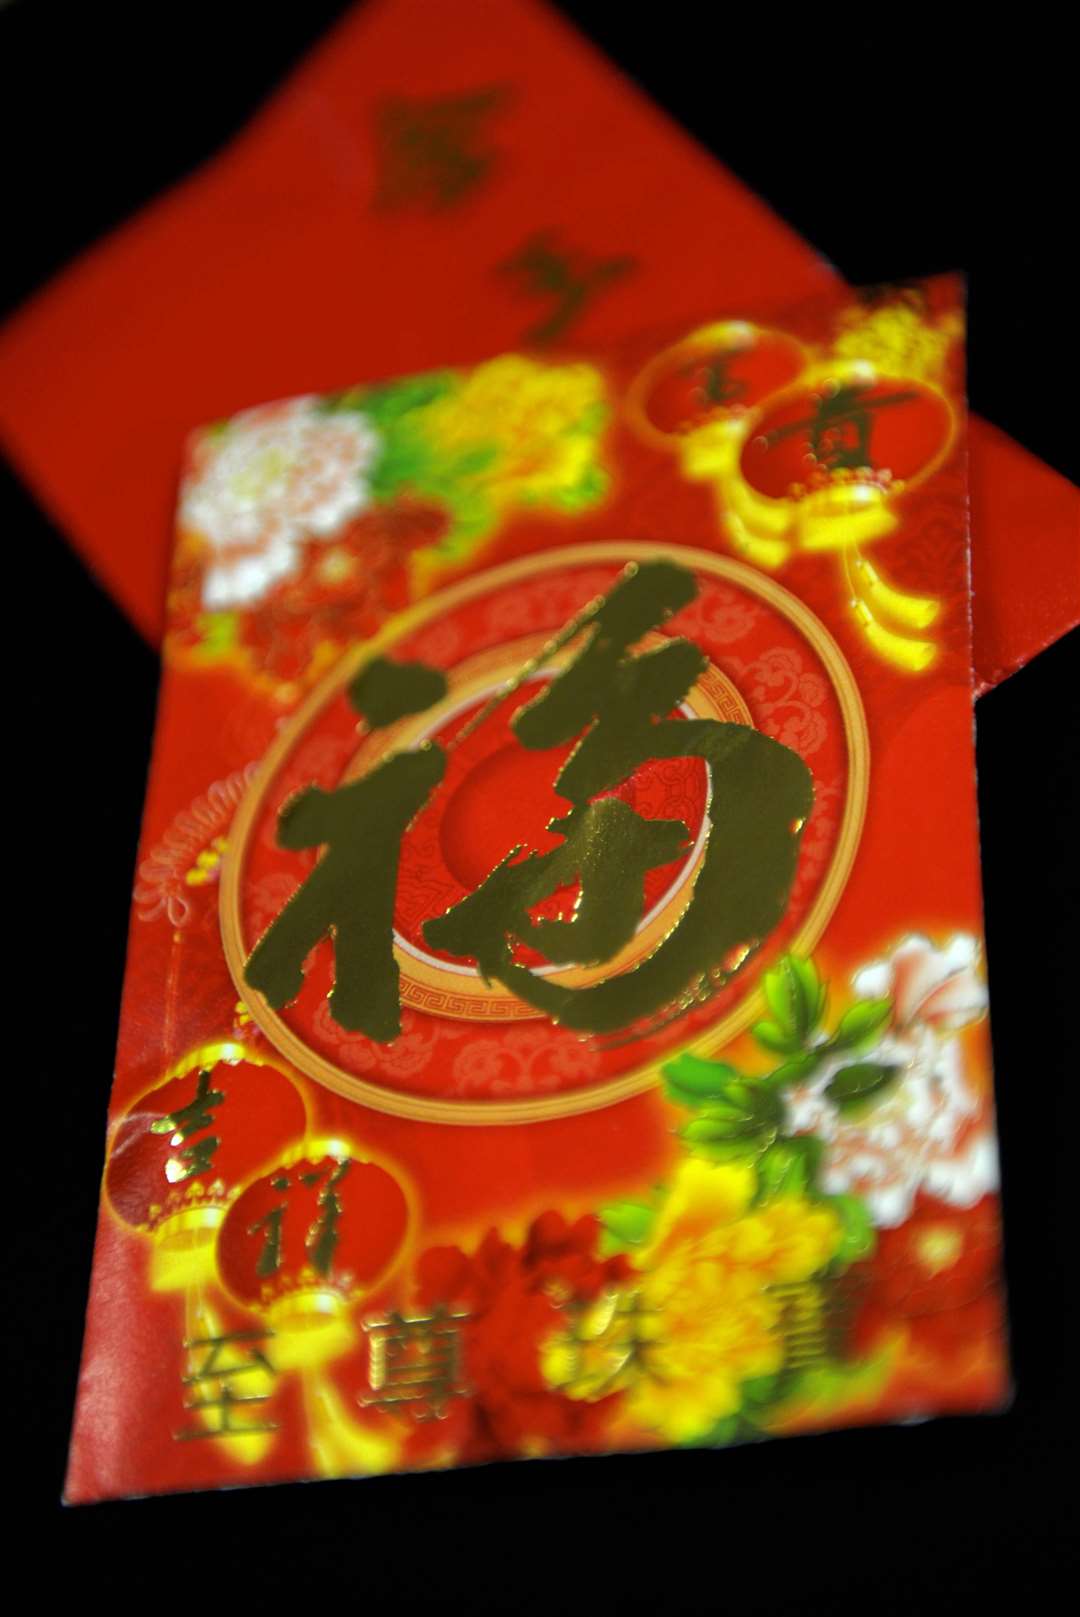 The lucky red envelope handed out to mark the Chinese New Year.